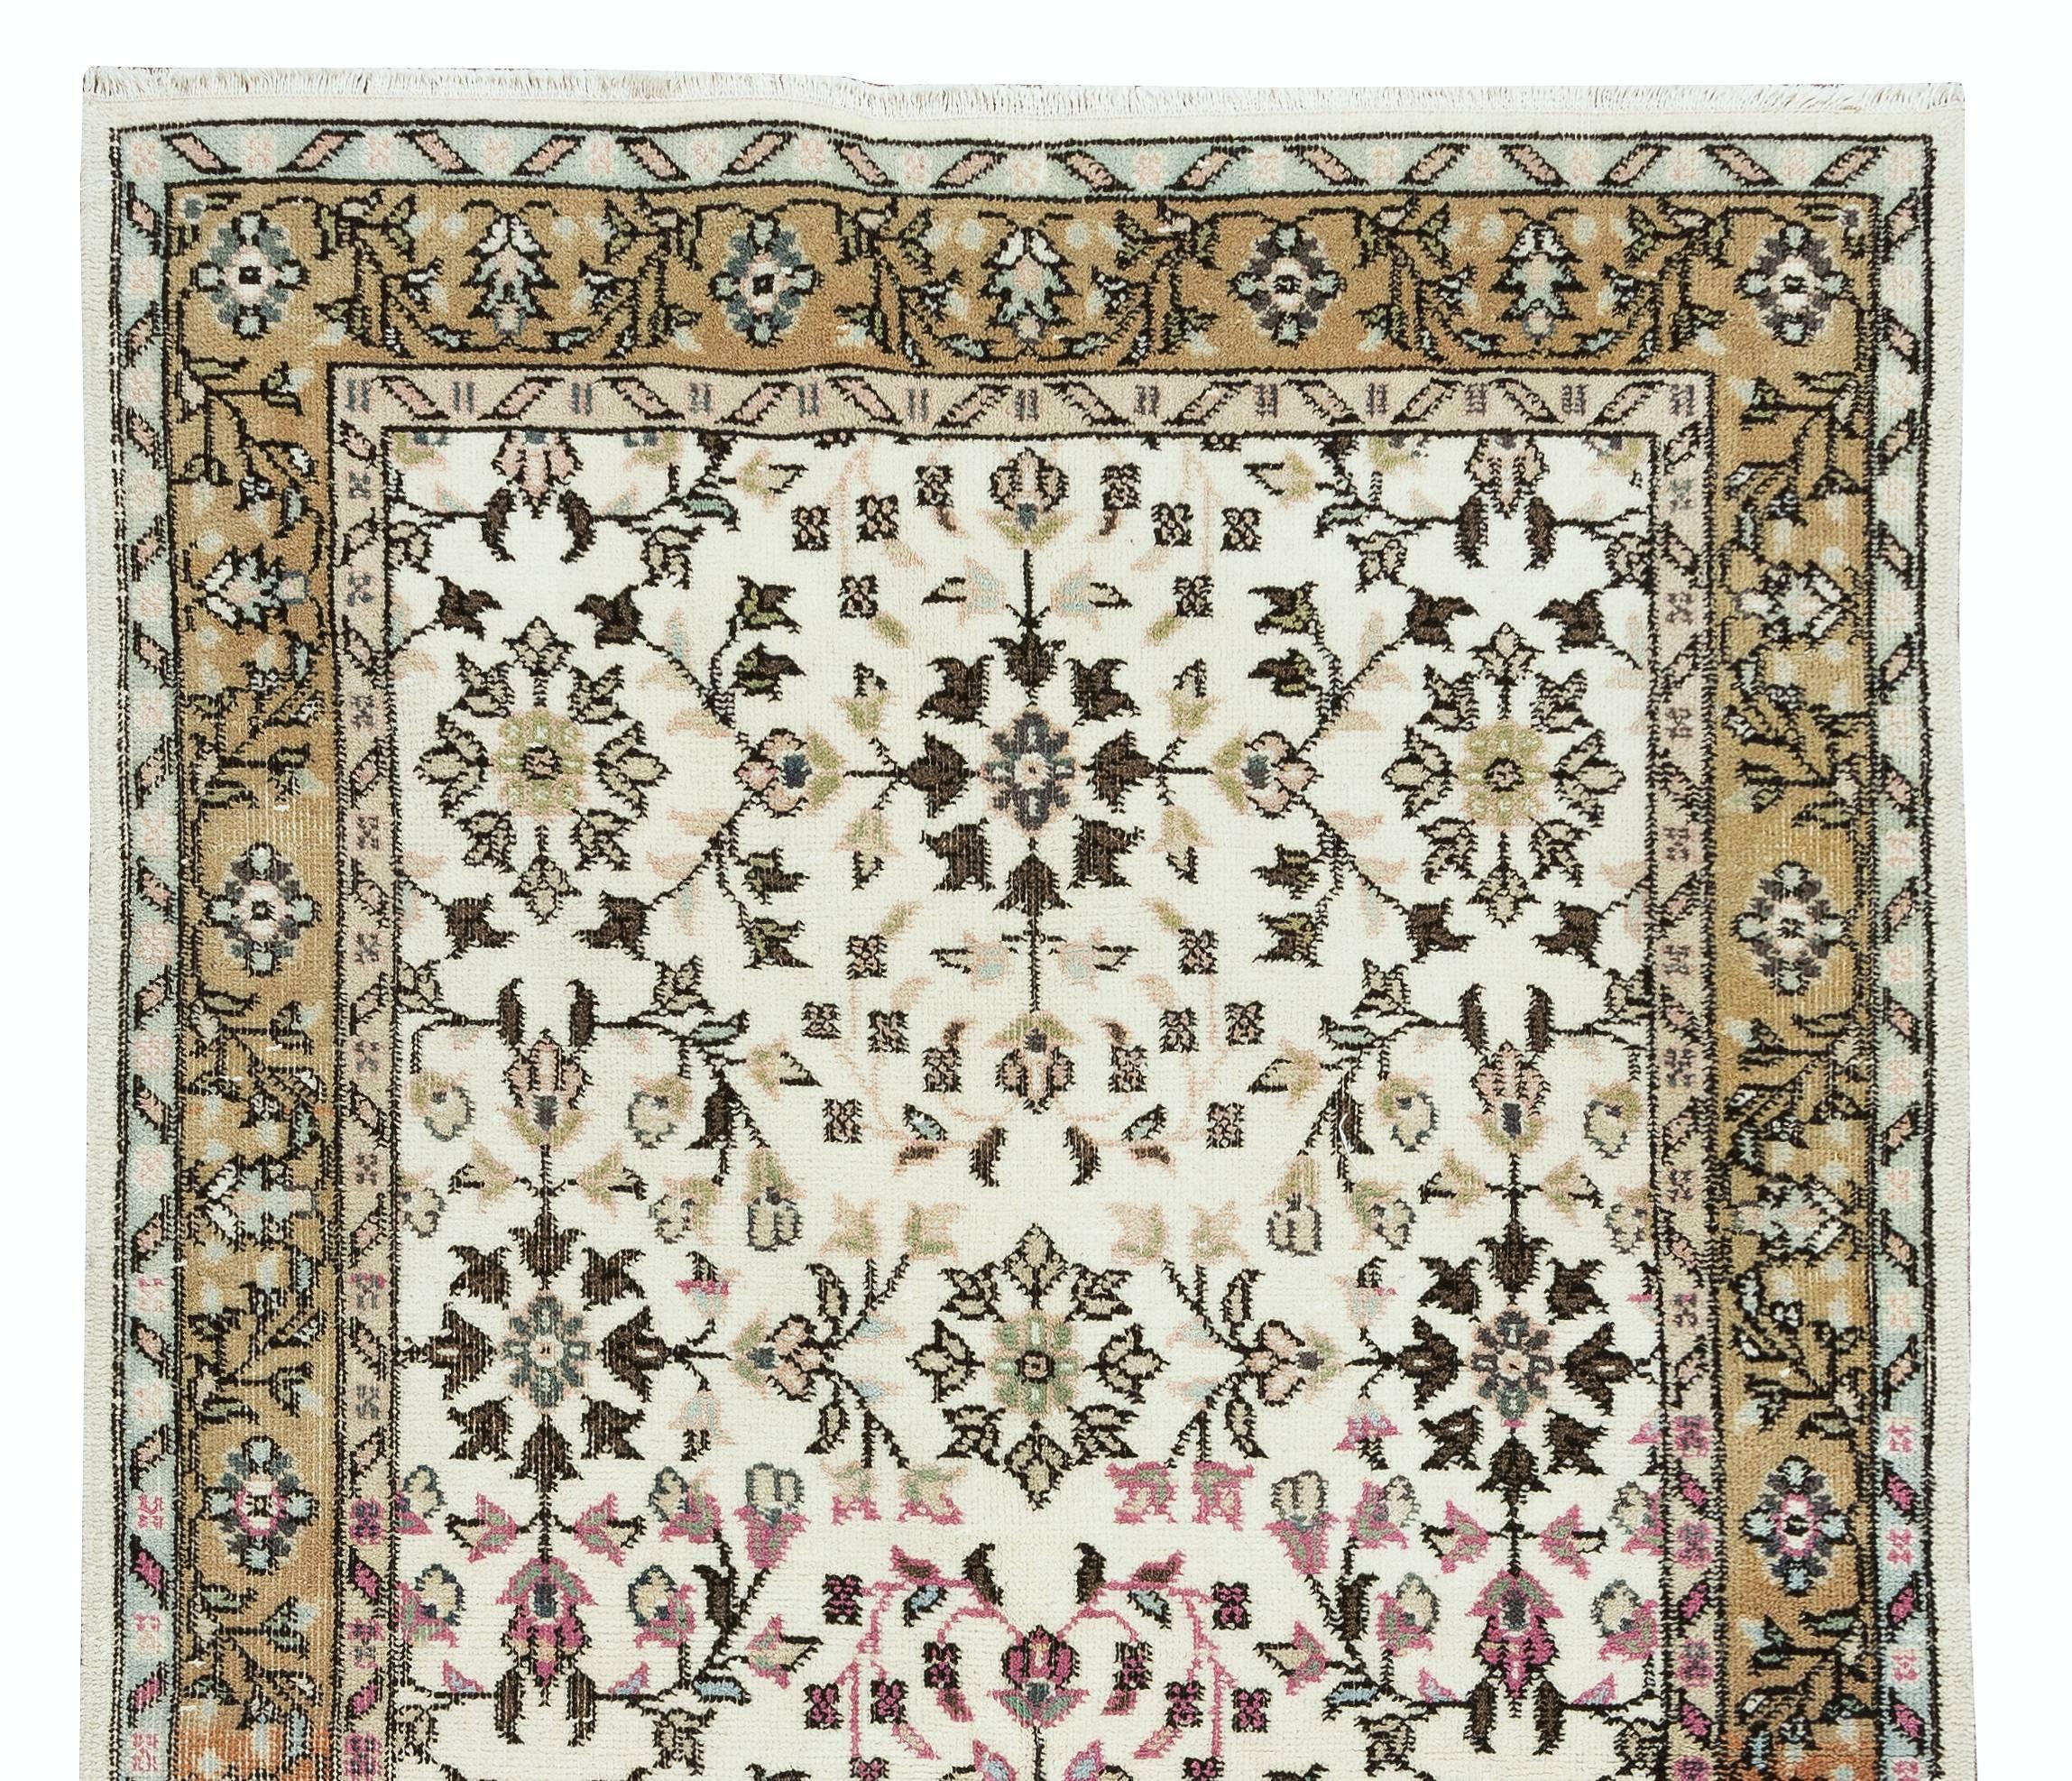 Turc 4x7 Ft Authentic Handmade Vintage Turkish Wool Accent Rug with Colorful Flowers en vente